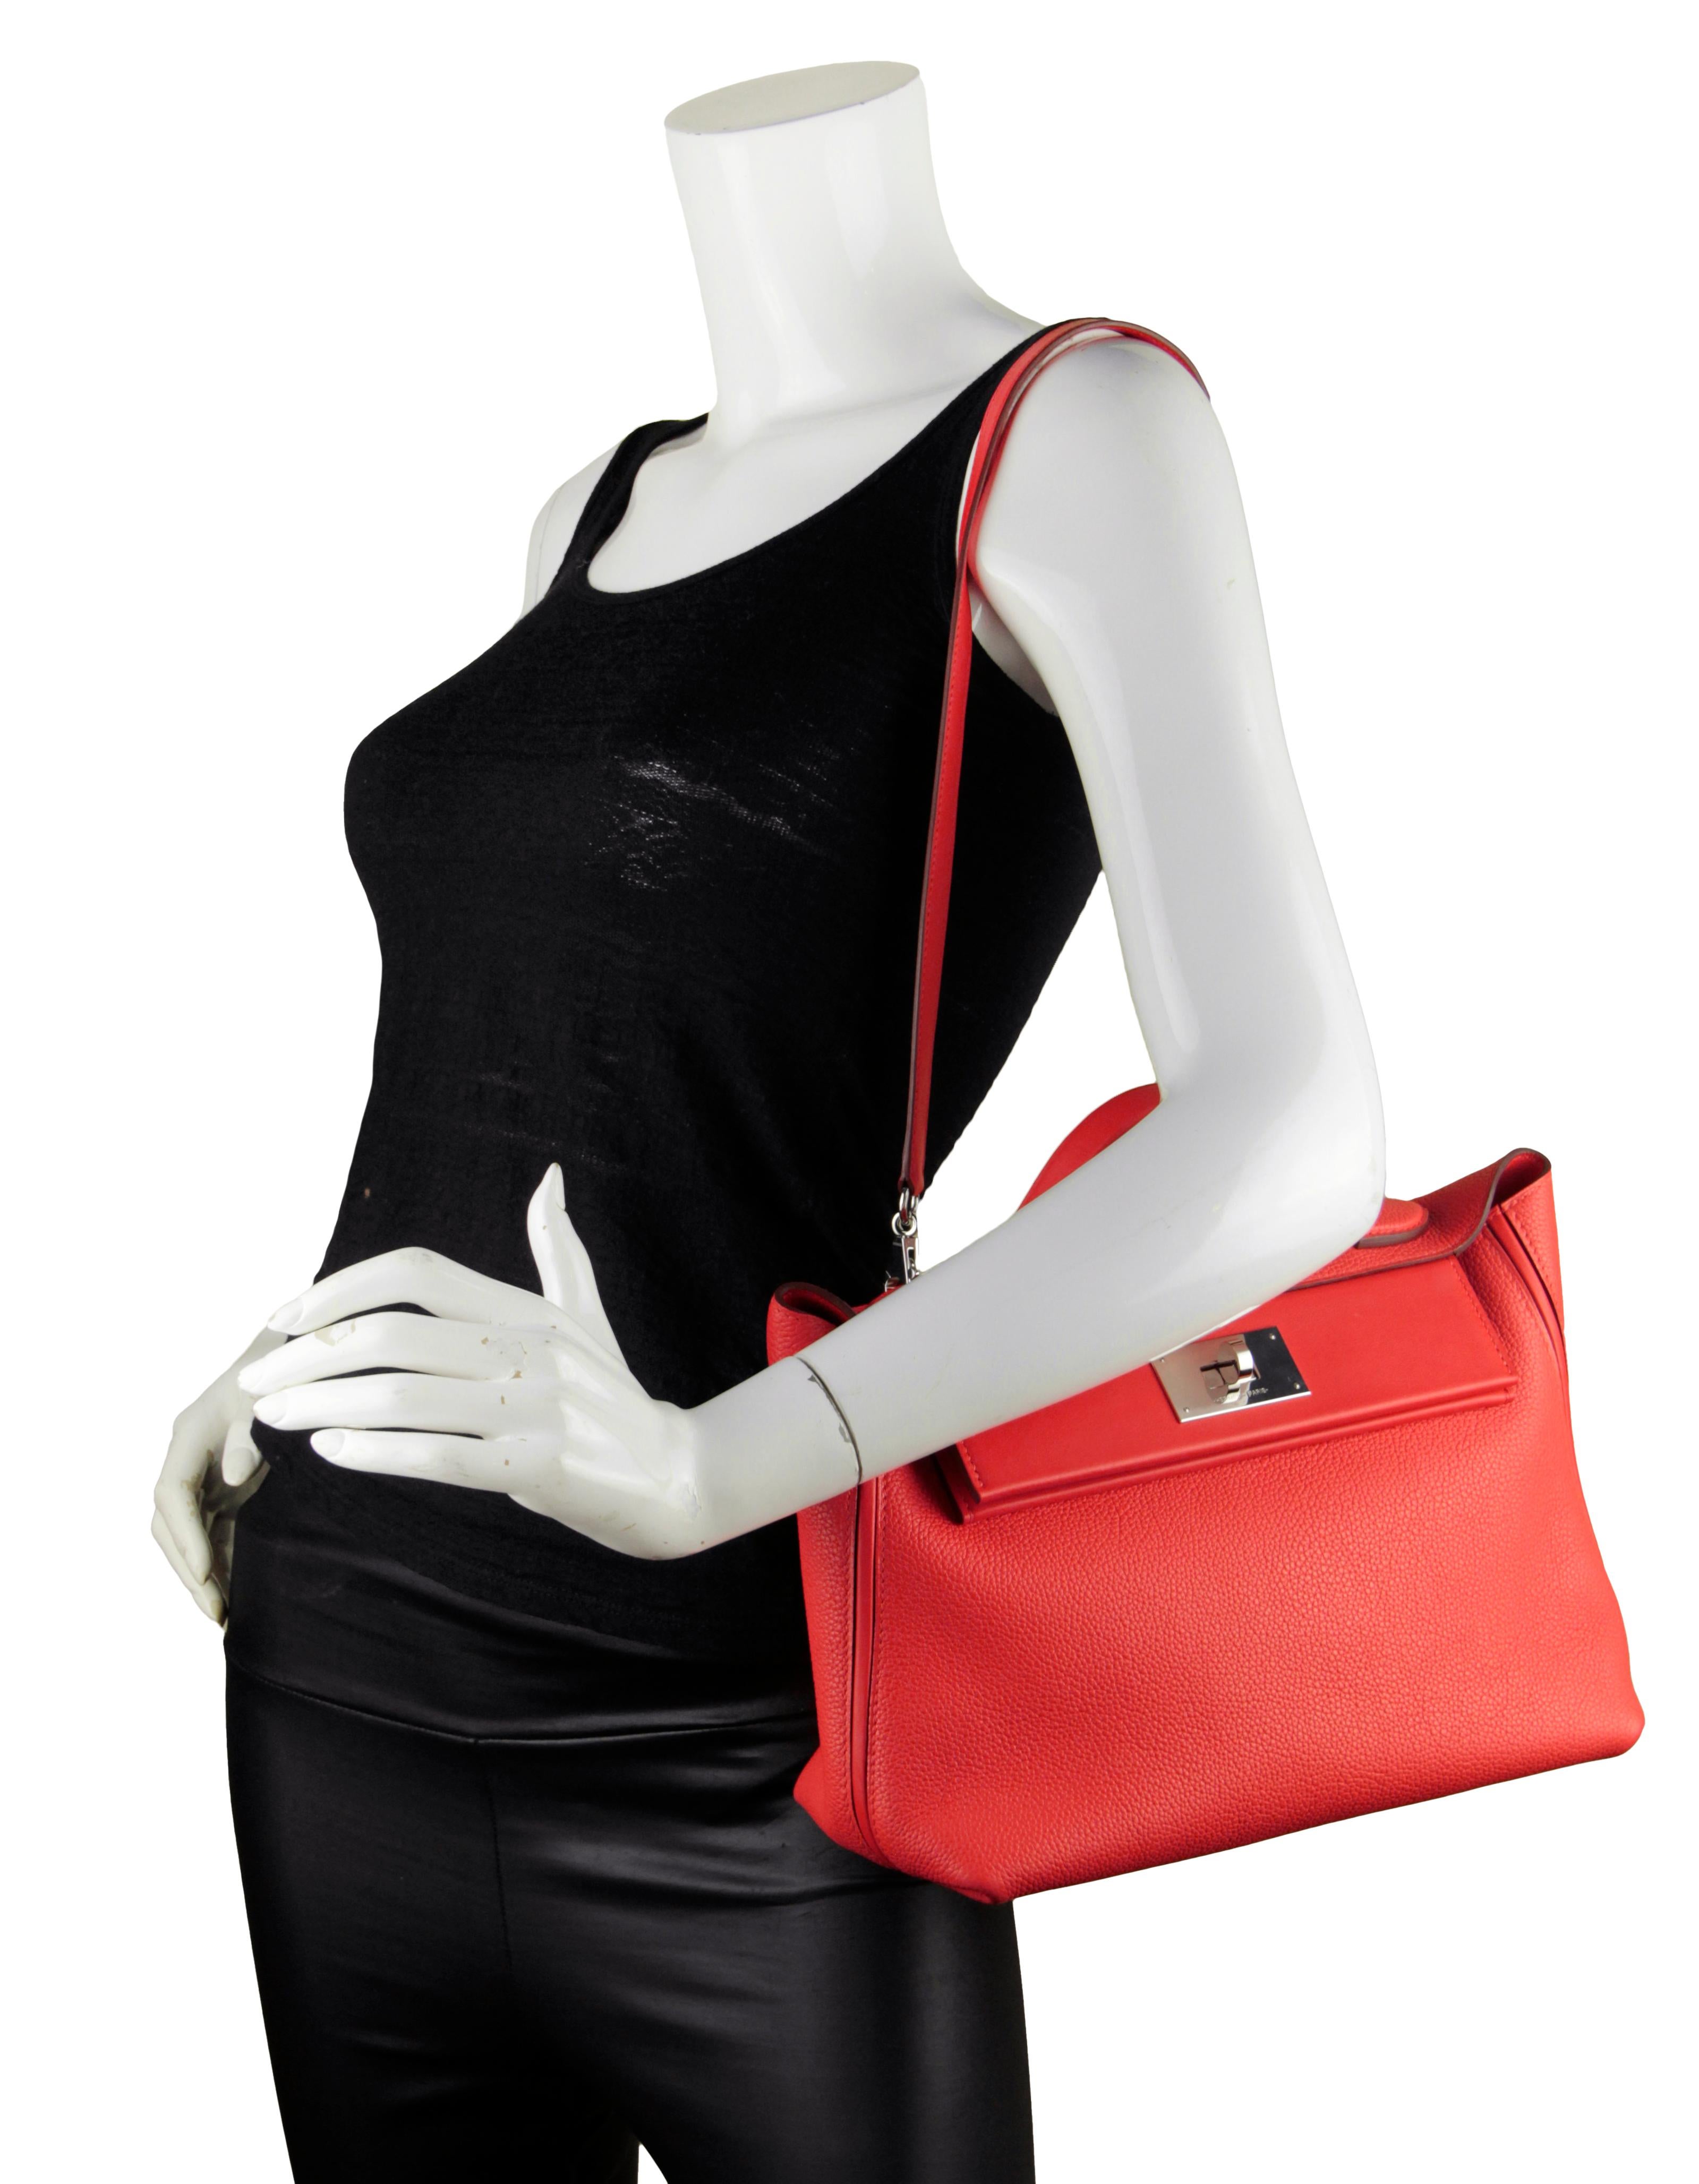 Hermes Togo/Swift Leather Capucine 29cm 24/24 Bag

Made In: France
Year of Production: 2019
Color: Capucine- coral
Hardware: Silvertone palladium
Materials: Togo and swift leather
Lining: Capucine swift leather
Closure/Opening: Flap top with twist